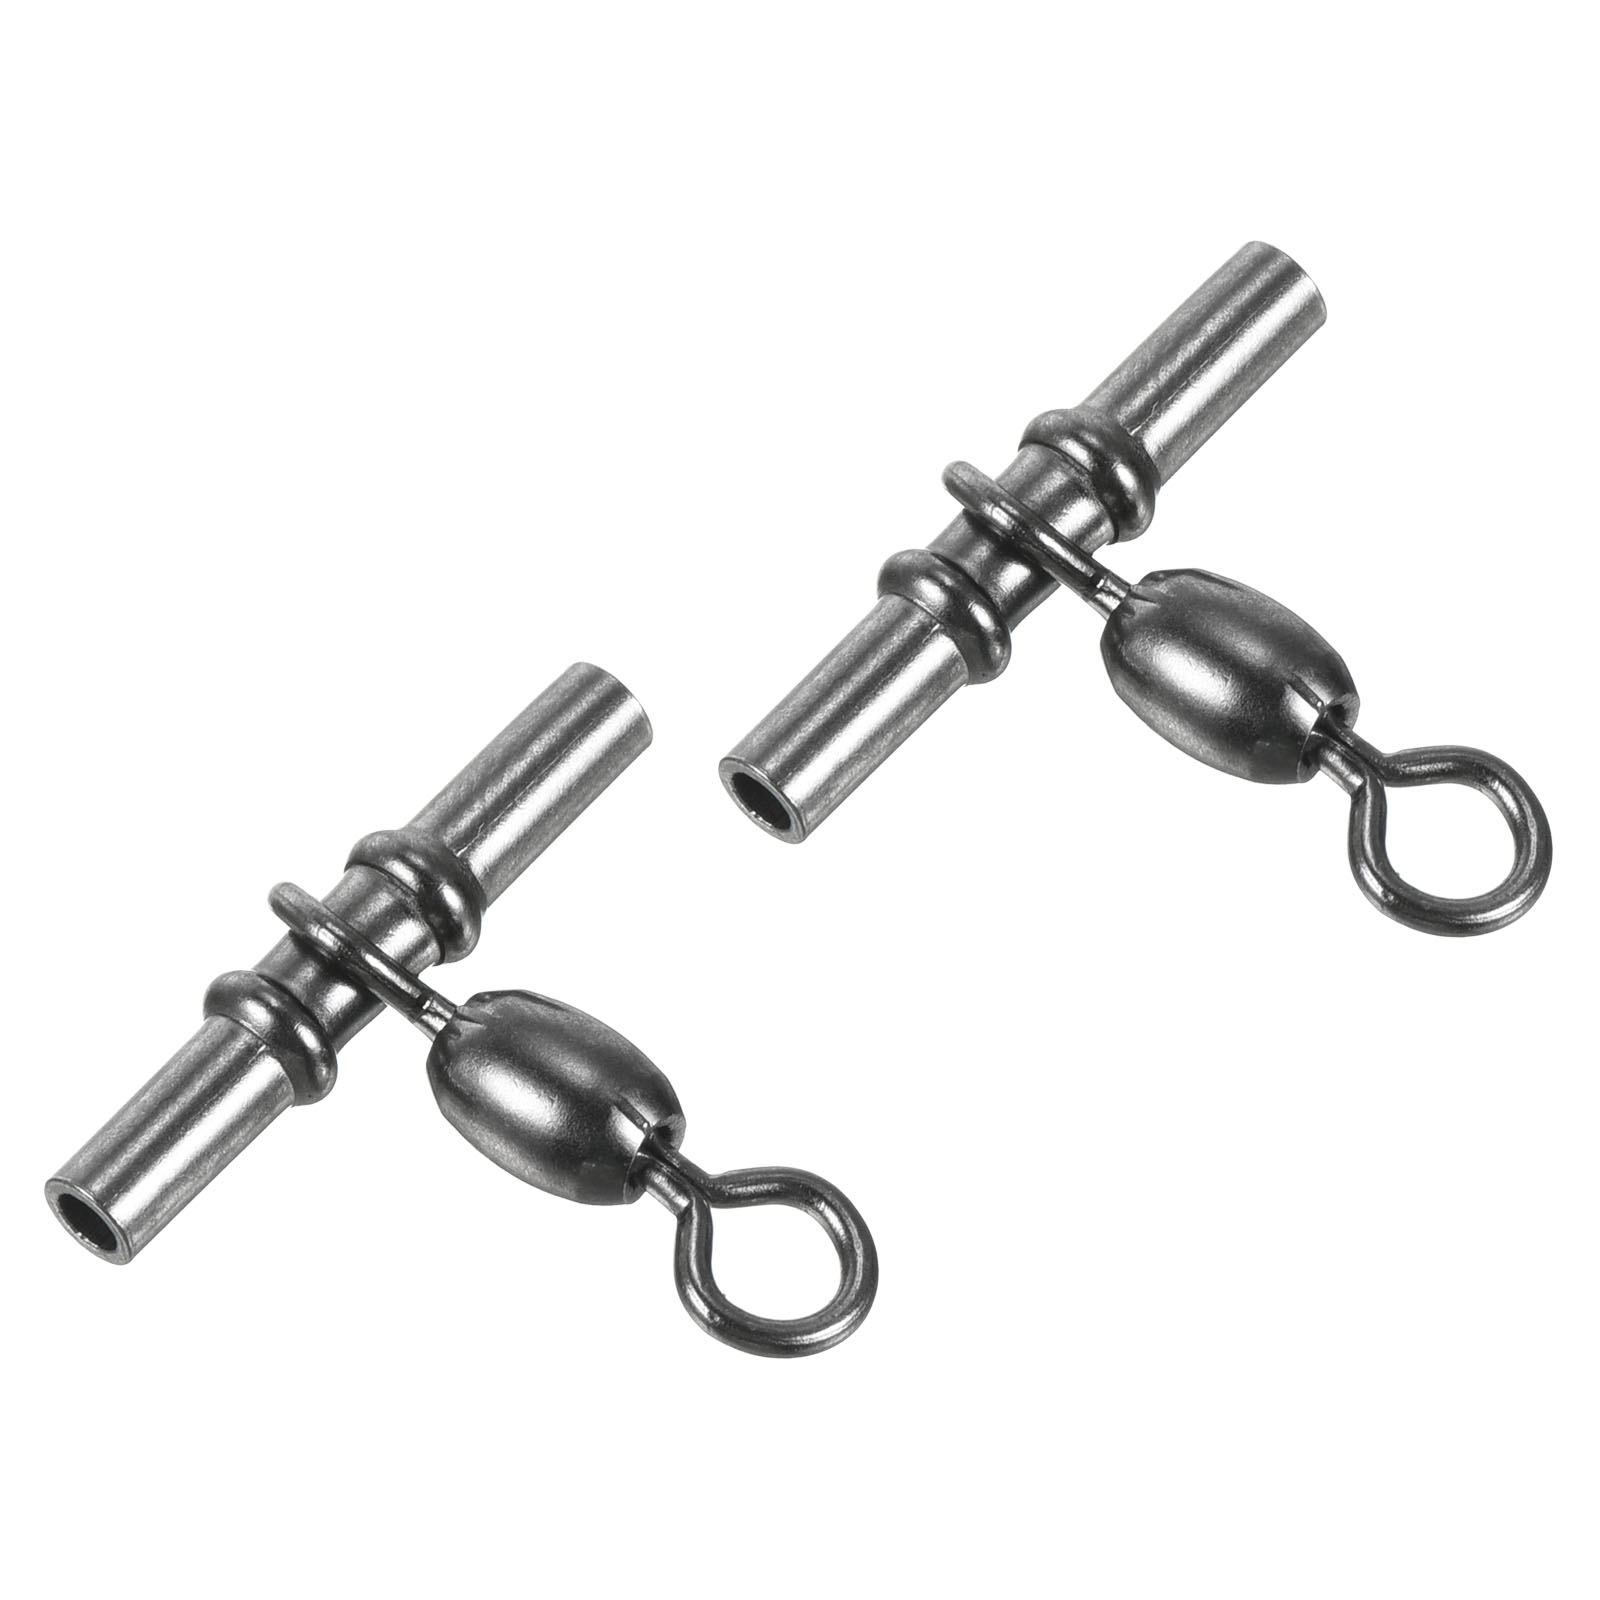 Sleeve Swivel, 97lb Stainless Steel Cross Line 3 Way Fishing Terminal Tackle, Black 50 Pack - image 1 of 6